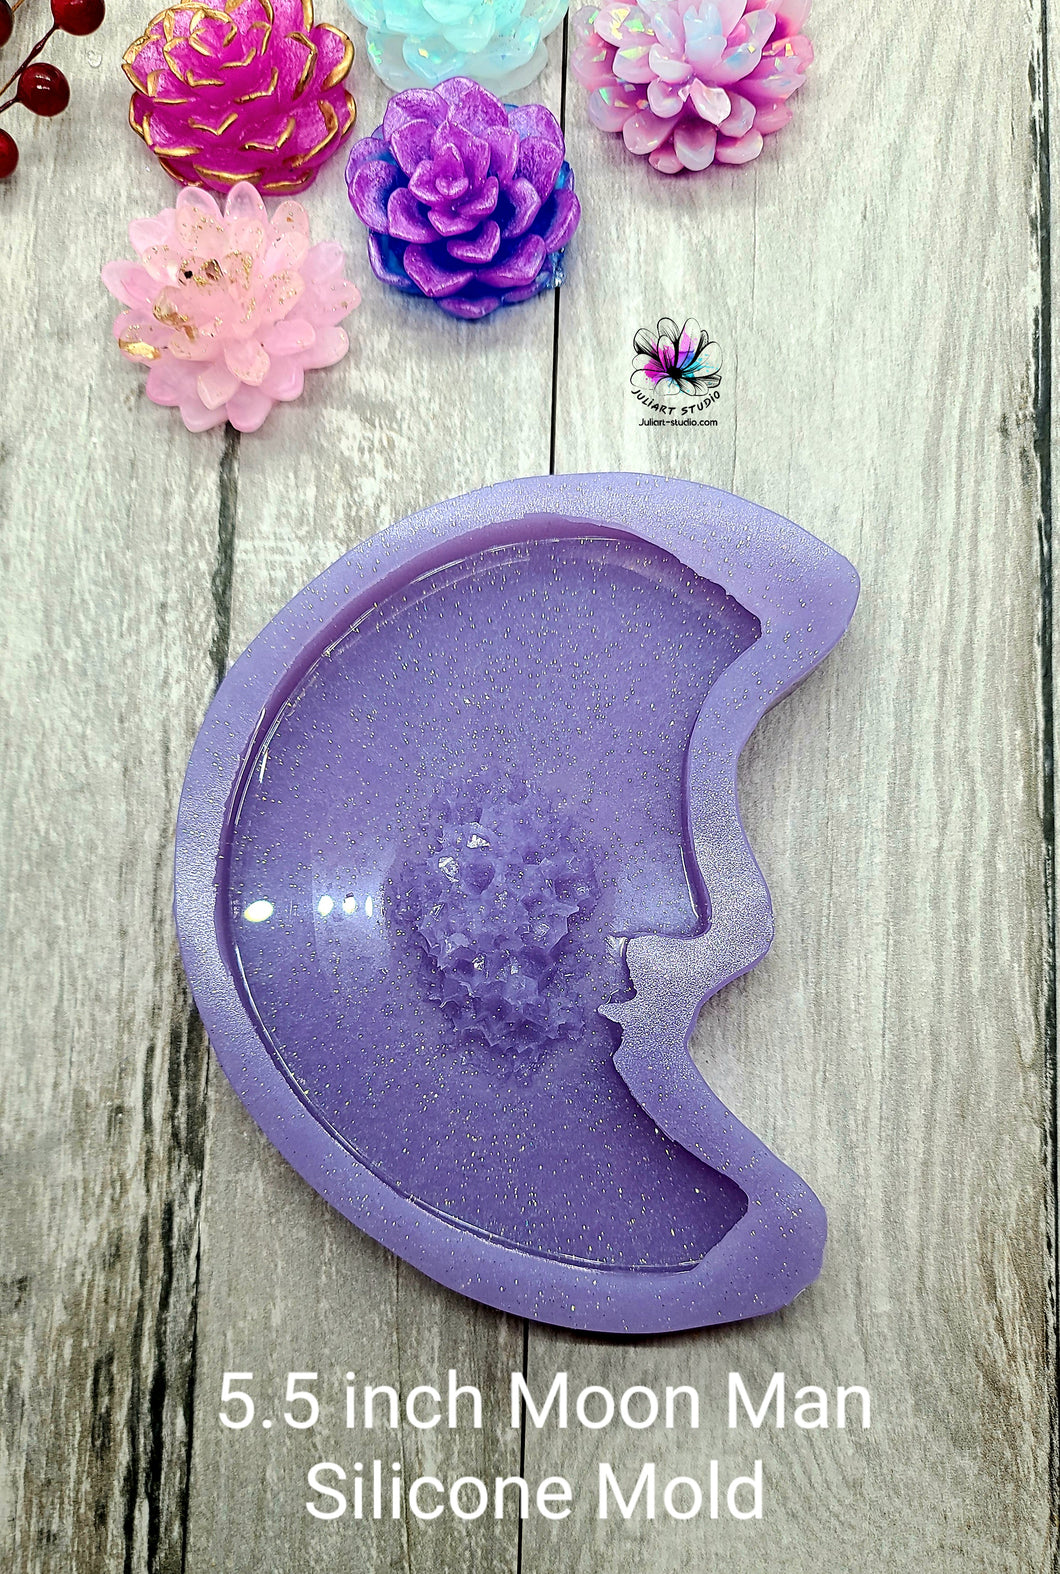 5.5 inch Moon Man Silicone Mold for Resin